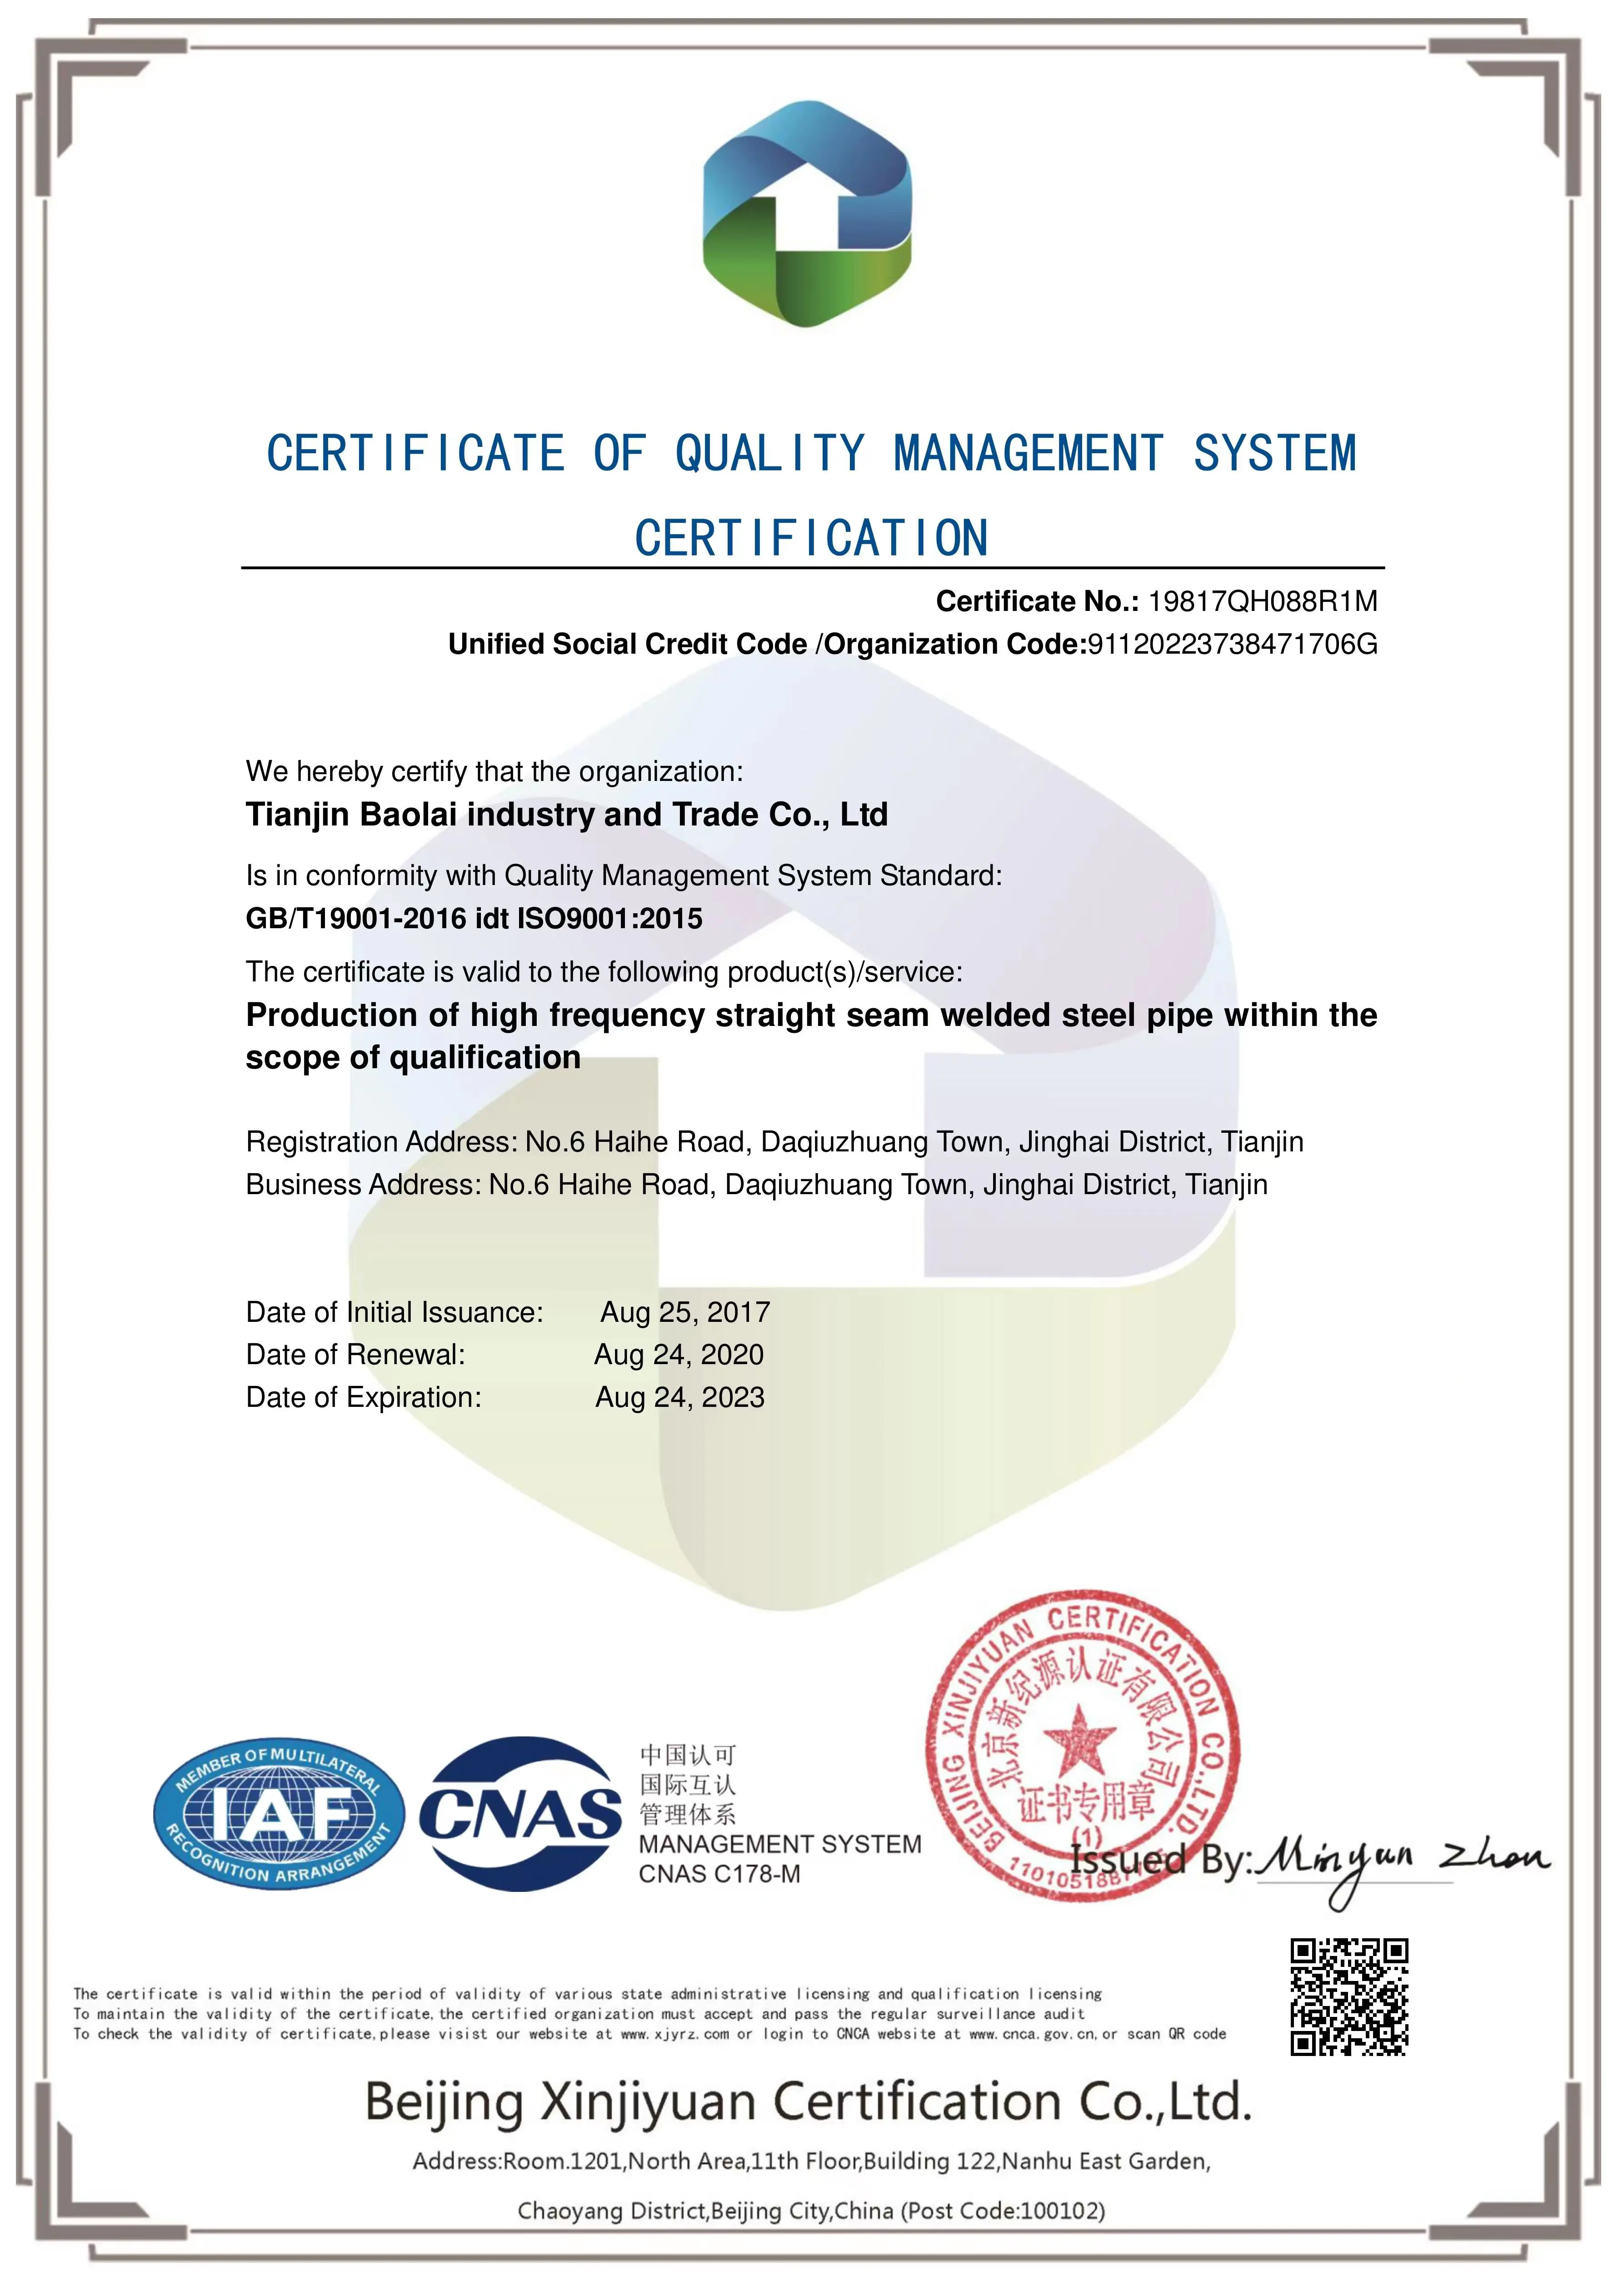 Baolai Steel Pipe business certificate -ISO 9001